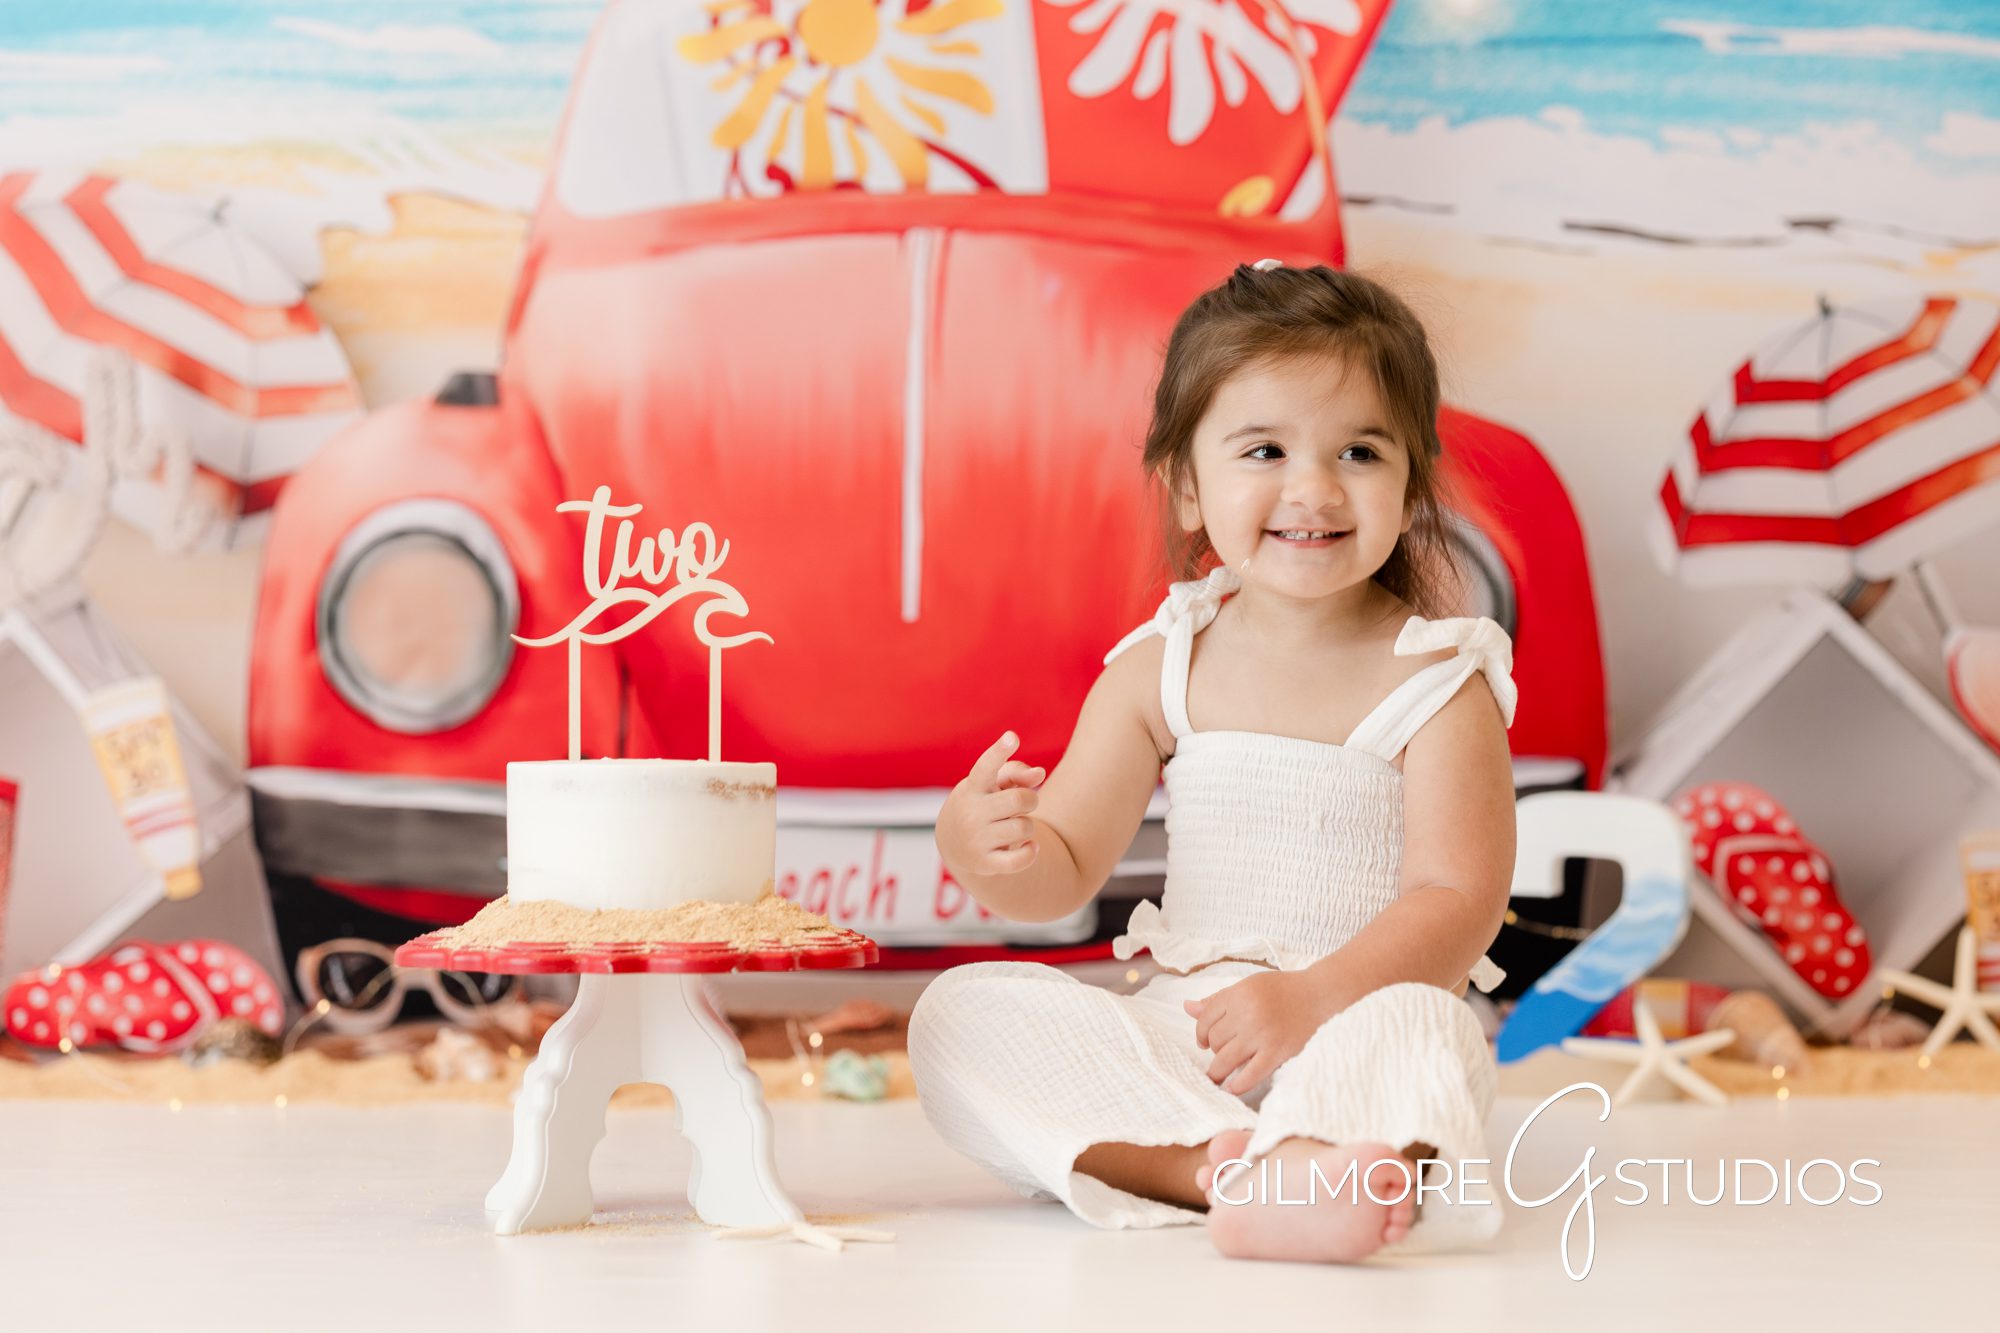 Summer Cake Smash VW Bug Beetle Newport Beach, beach, yellow polka dot bikini, gilmore studios, cake smash, little girl 2nd birthday, happy bday, child photography, vw beetle, vw bug, volkswagon, red and white, beach, waves, sand, white cake, vanilla frosting, buttercream, excited, ponytail, white romper, surfboards, yellow and red